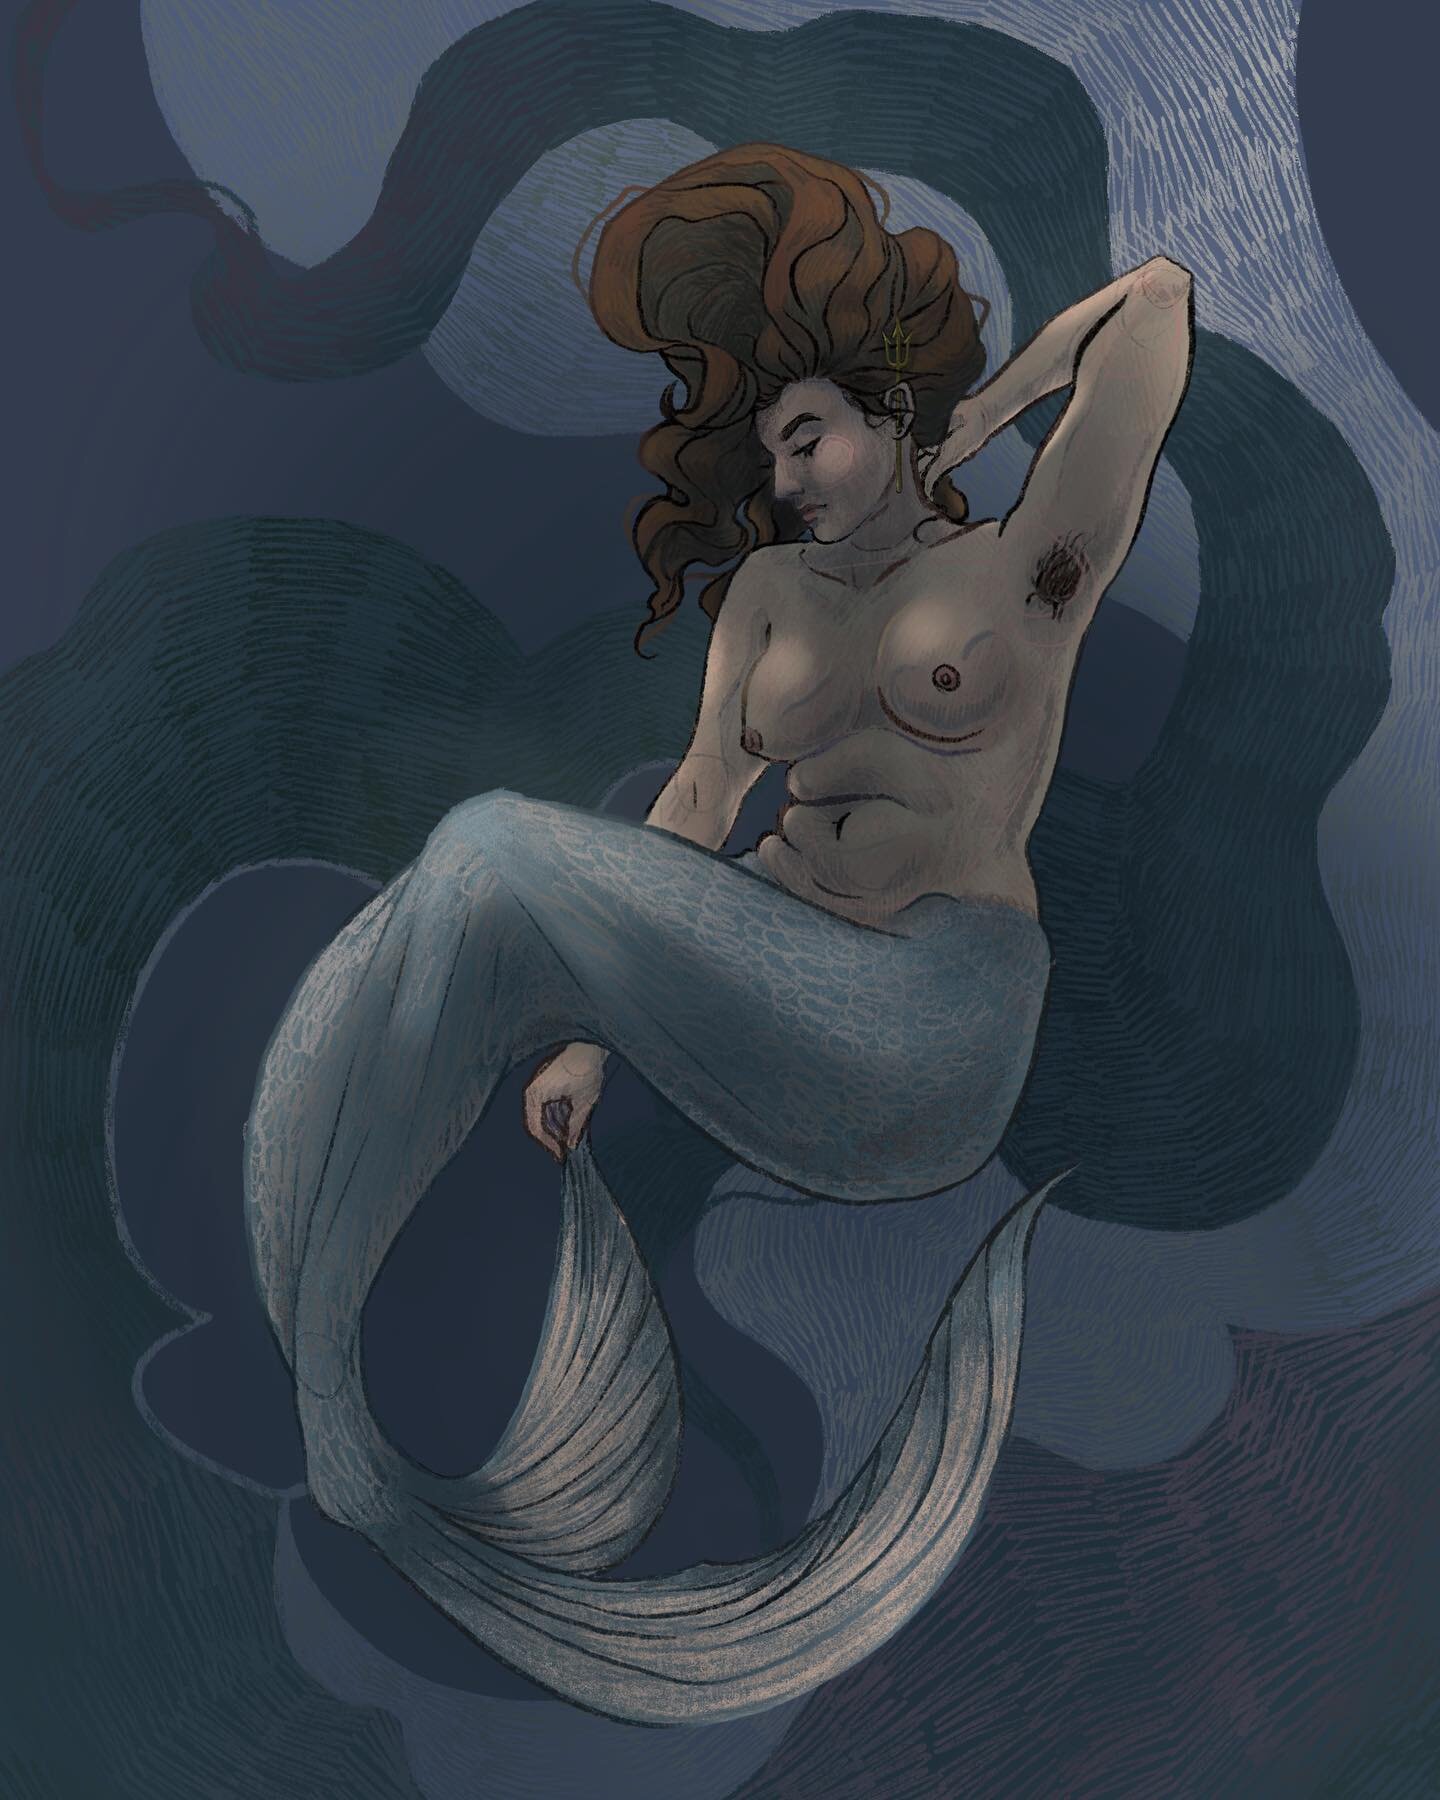 #mermay is something I look forward to every year, even though I haven&rsquo;t had the time to participate in some years. I&rsquo;m giving myself the grace to just draw as much as I can, not necessarily every day. 

So here&rsquo;s the first (or hope